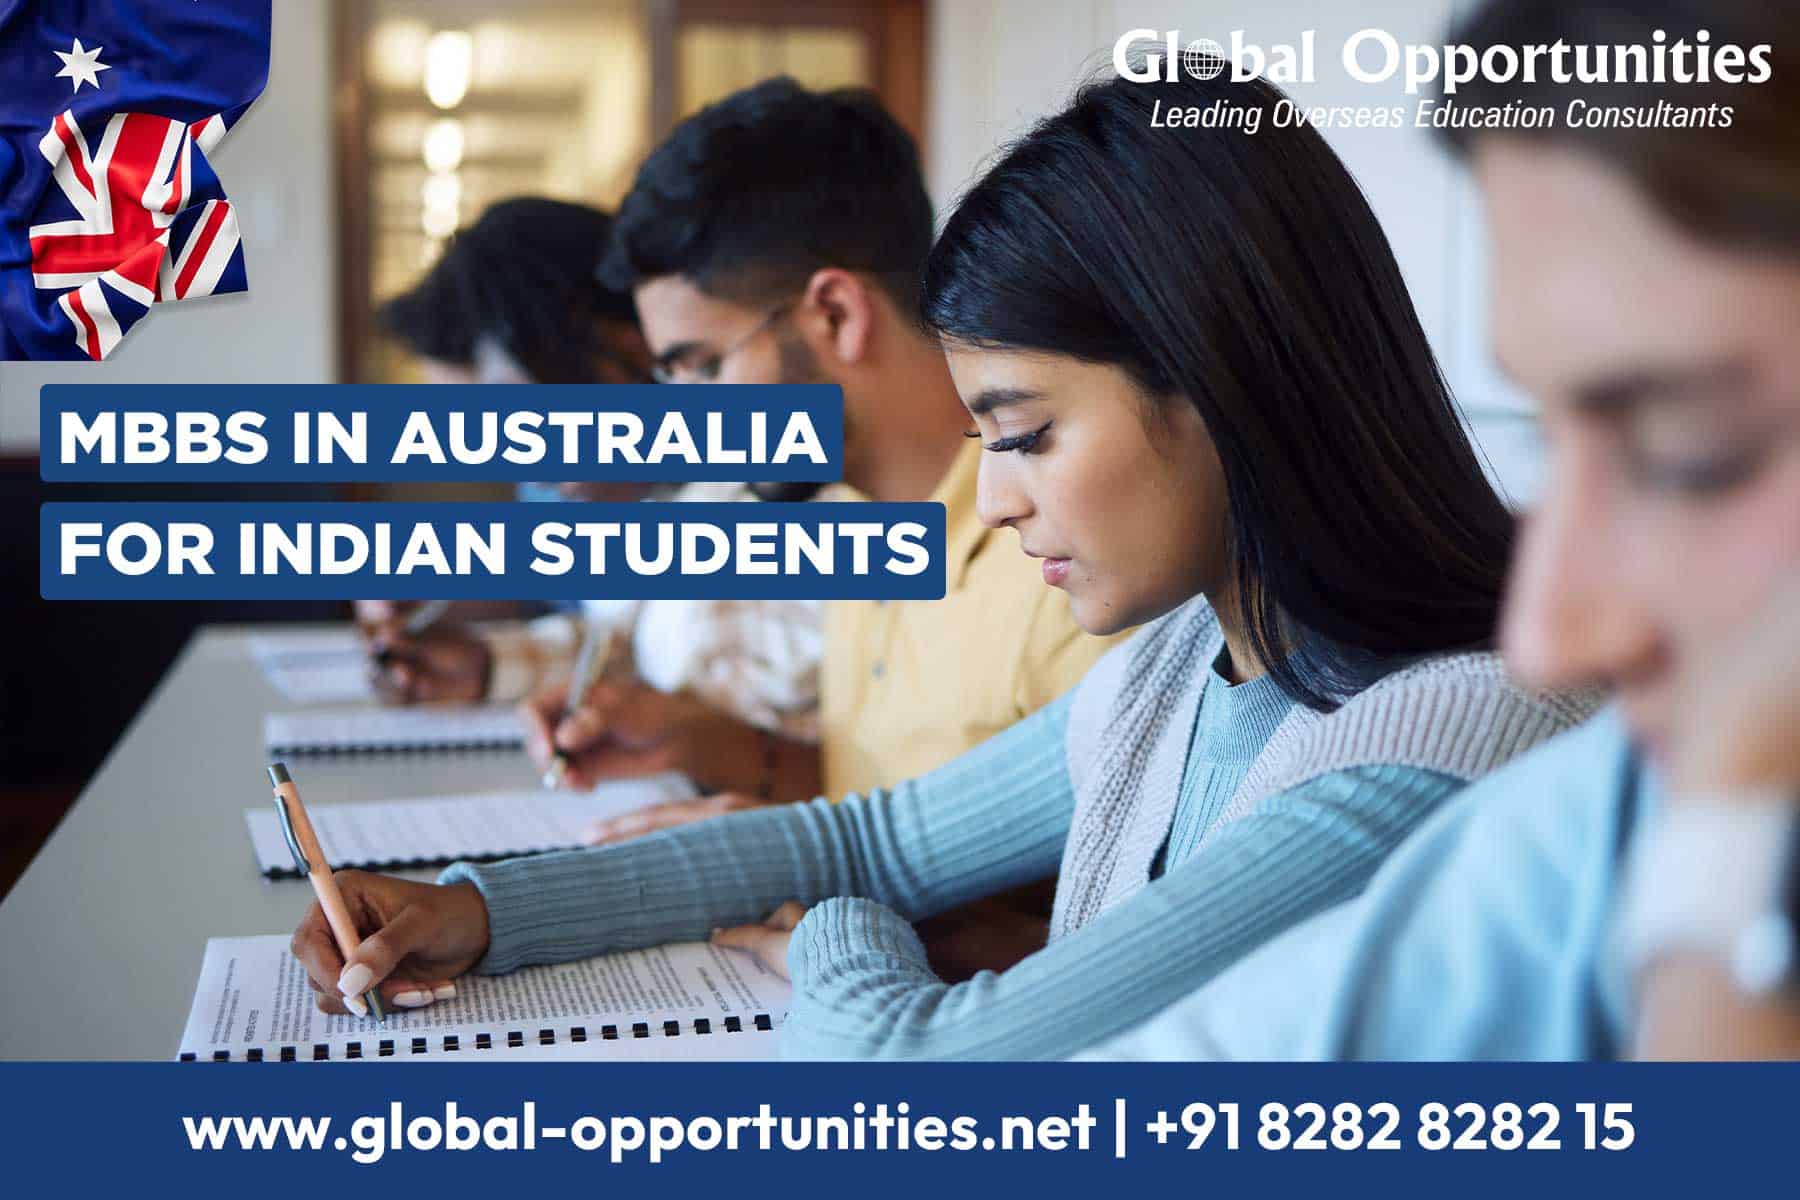 MBBS in Australia for Indian Students